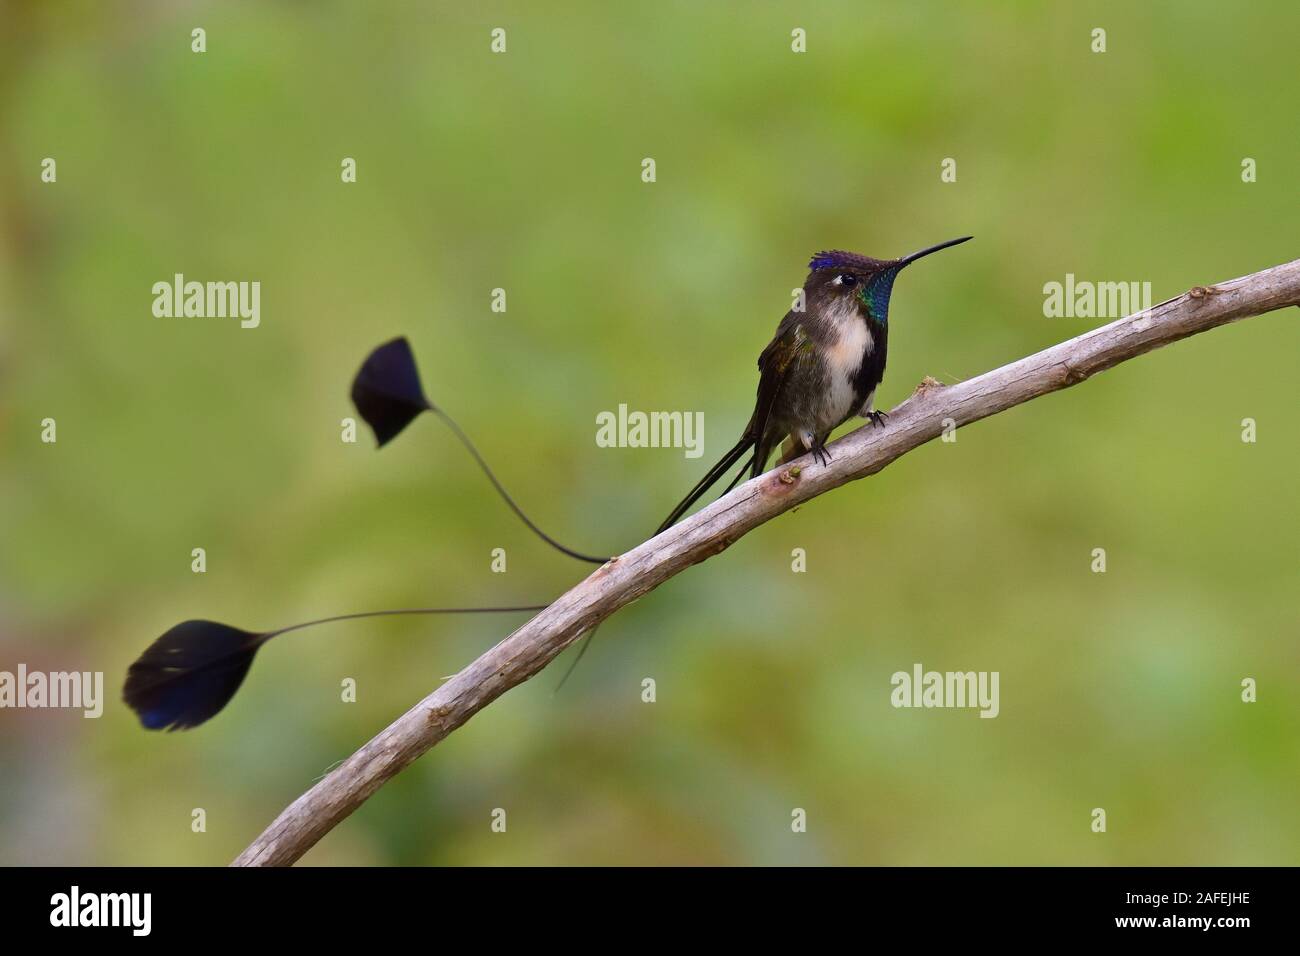 A Marvelous Spatuletail Hummingbirds the most rare and spectacular hummingbird in the world Stock Photo